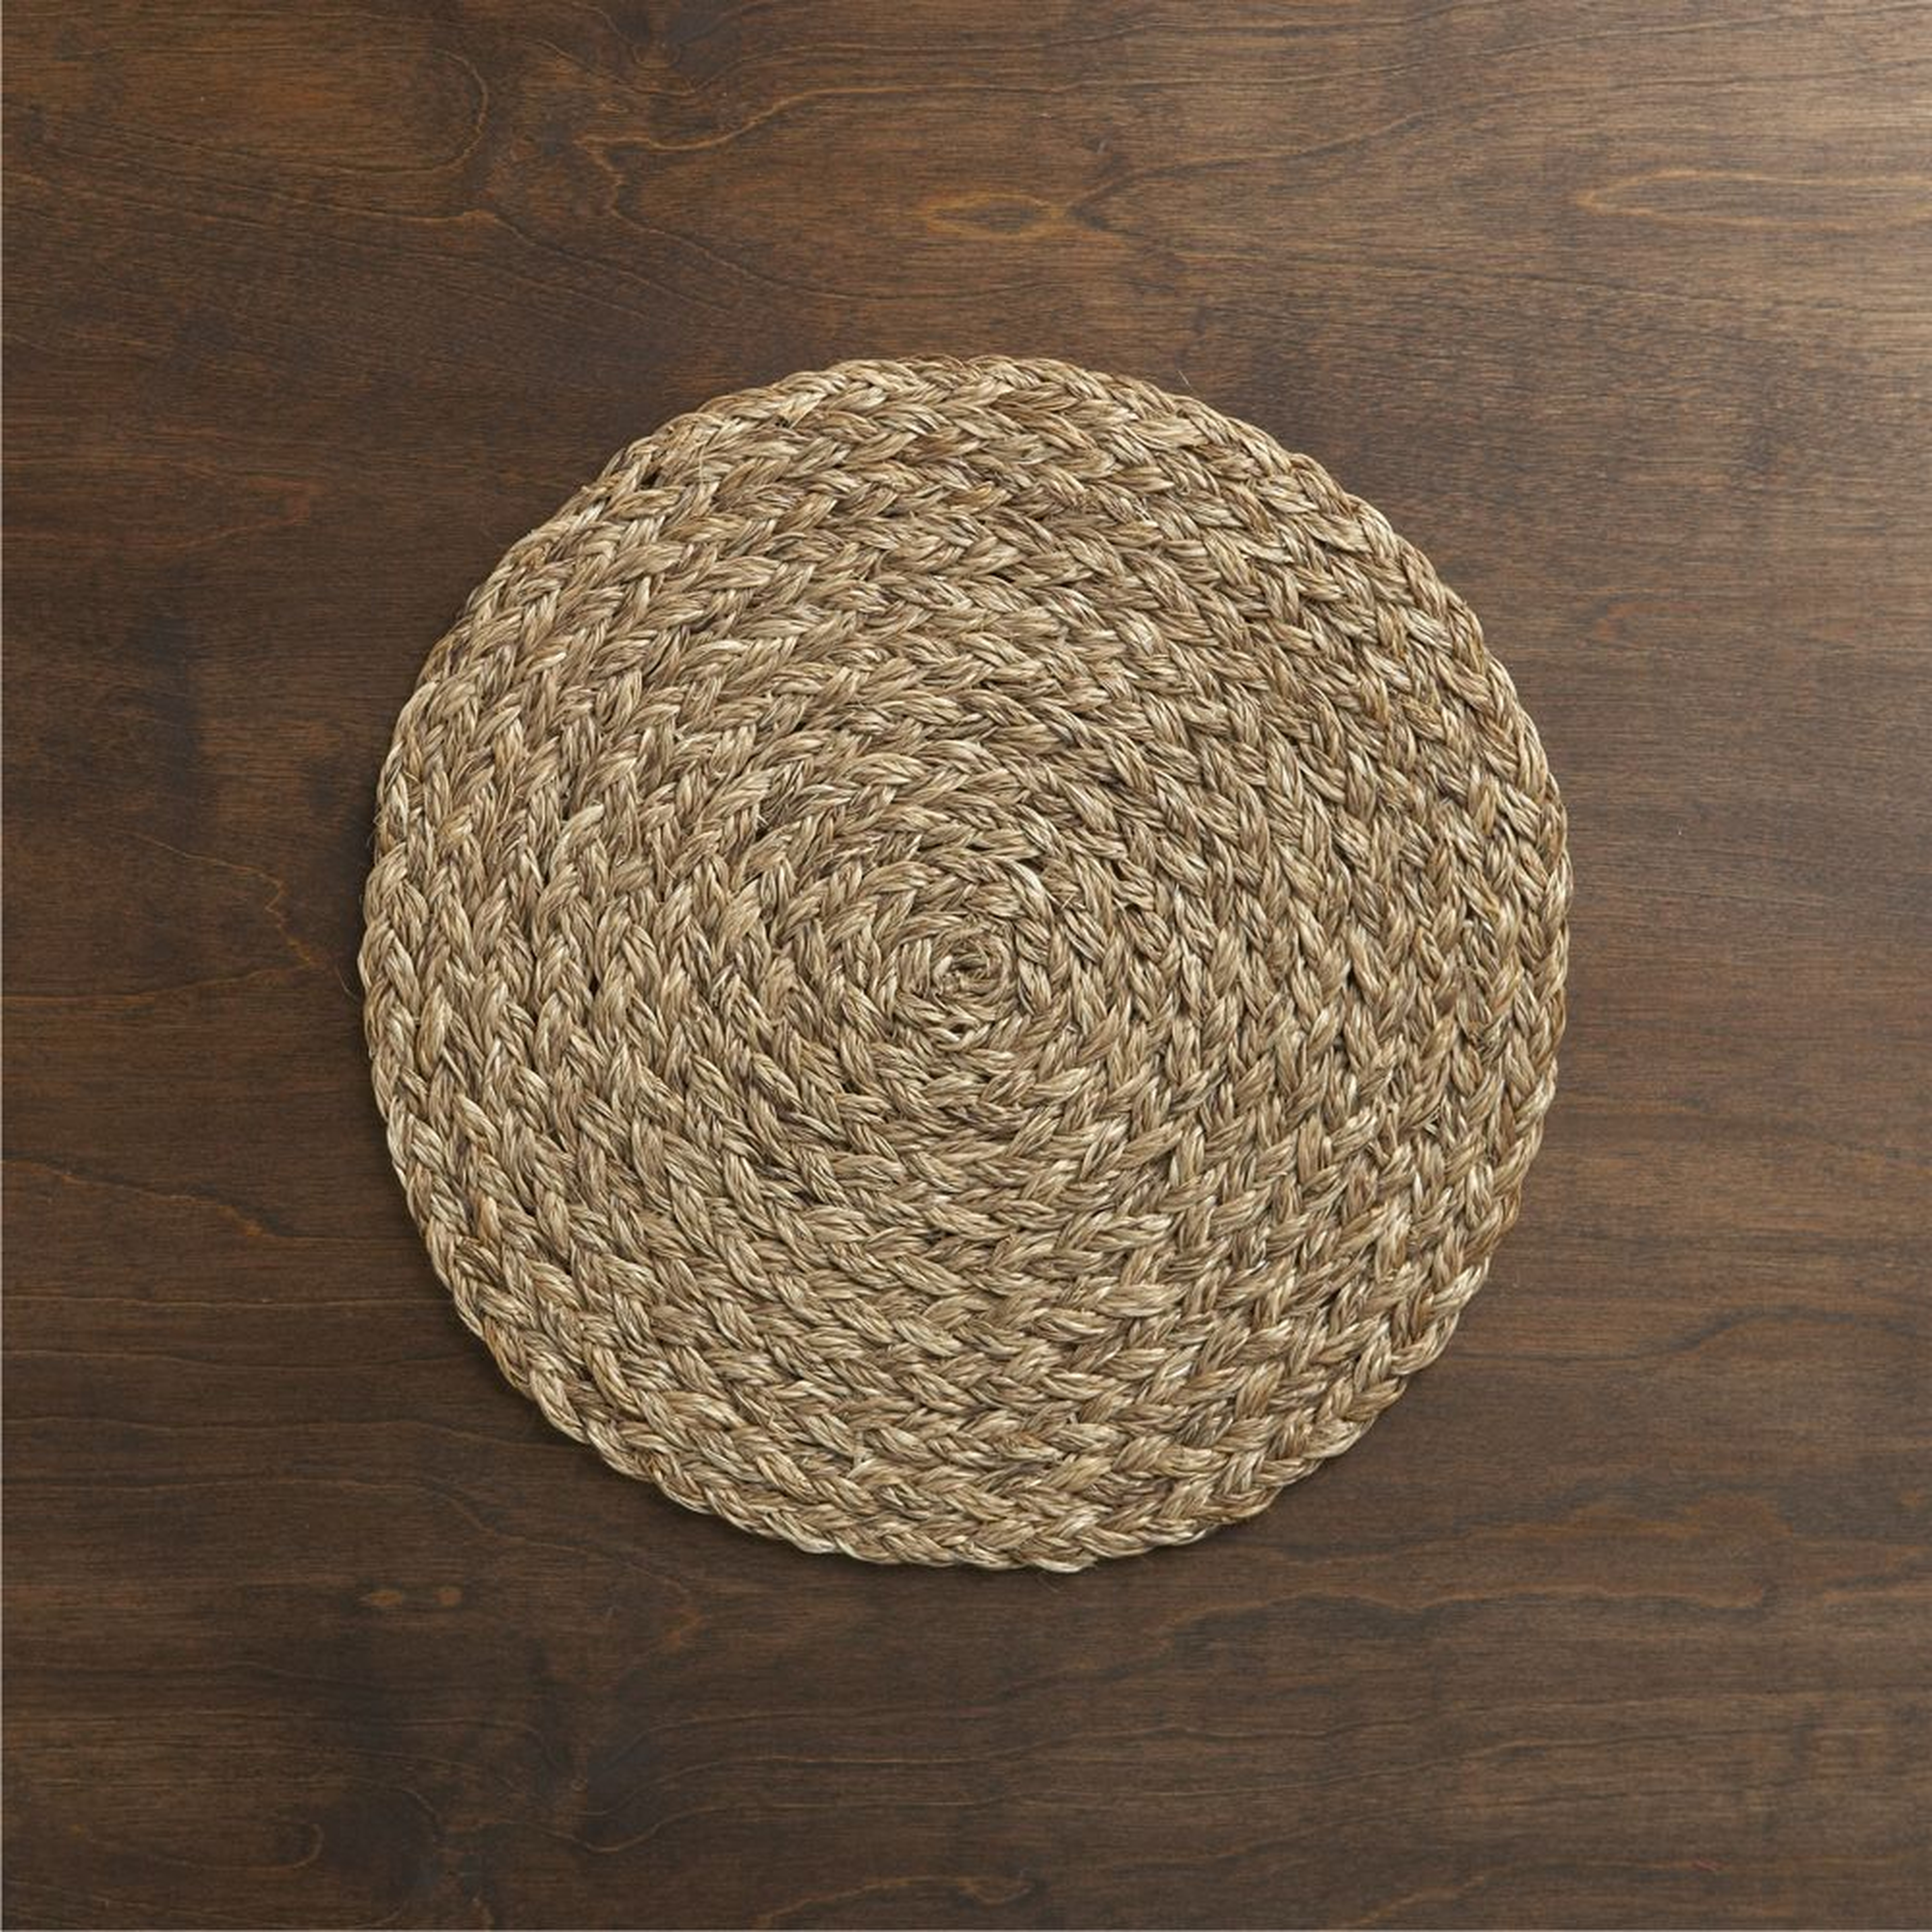 Bali Round Woven Placemat - Crate and Barrel